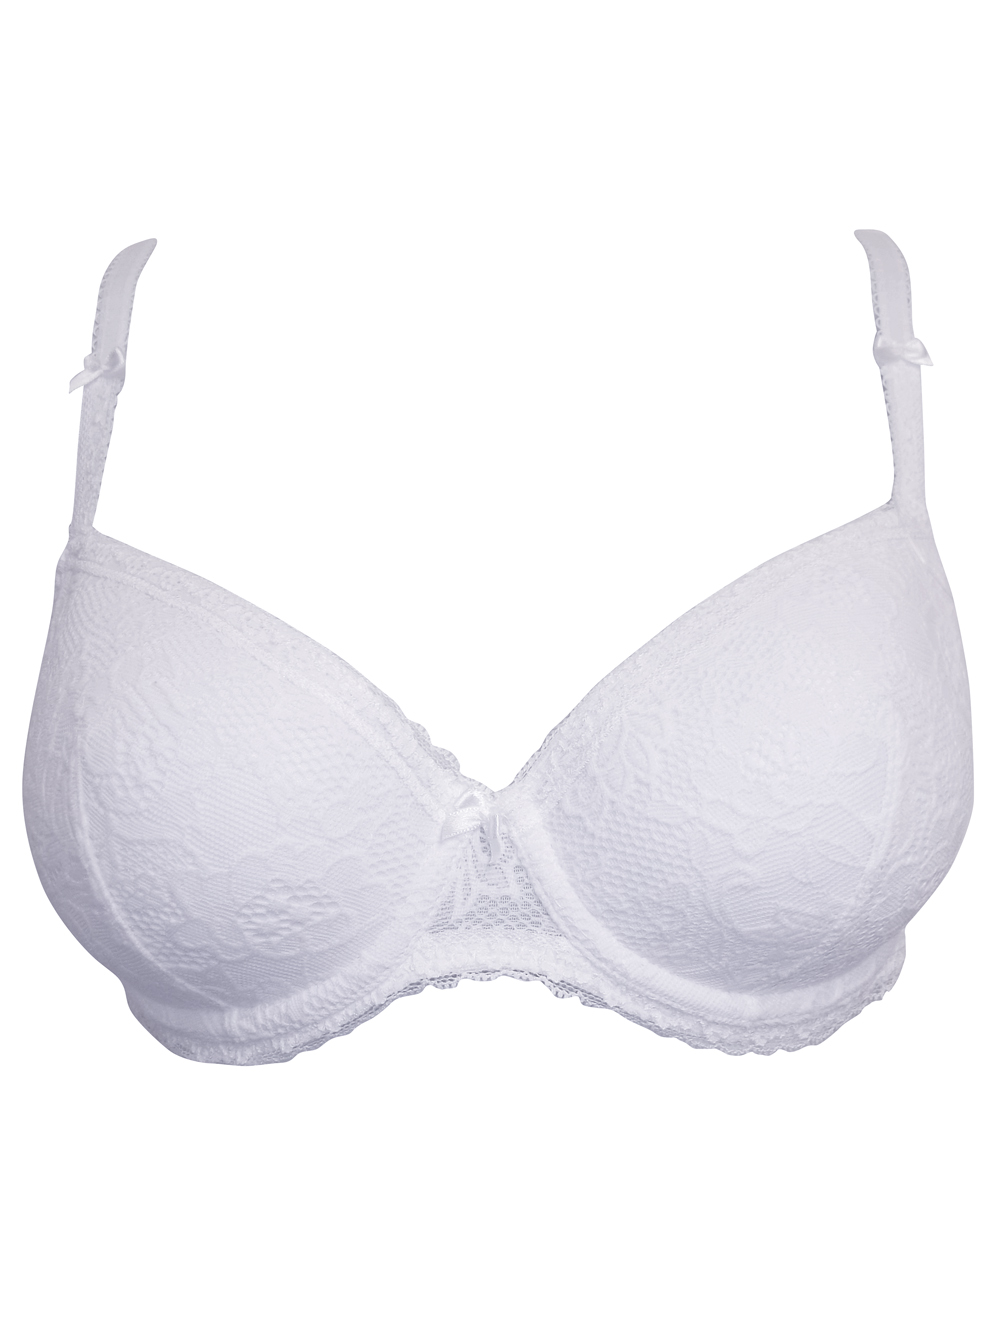 F&F - - WHITE Lace Padded Full Cup Bra - Size 34 to 38 (B-C-D-DD)